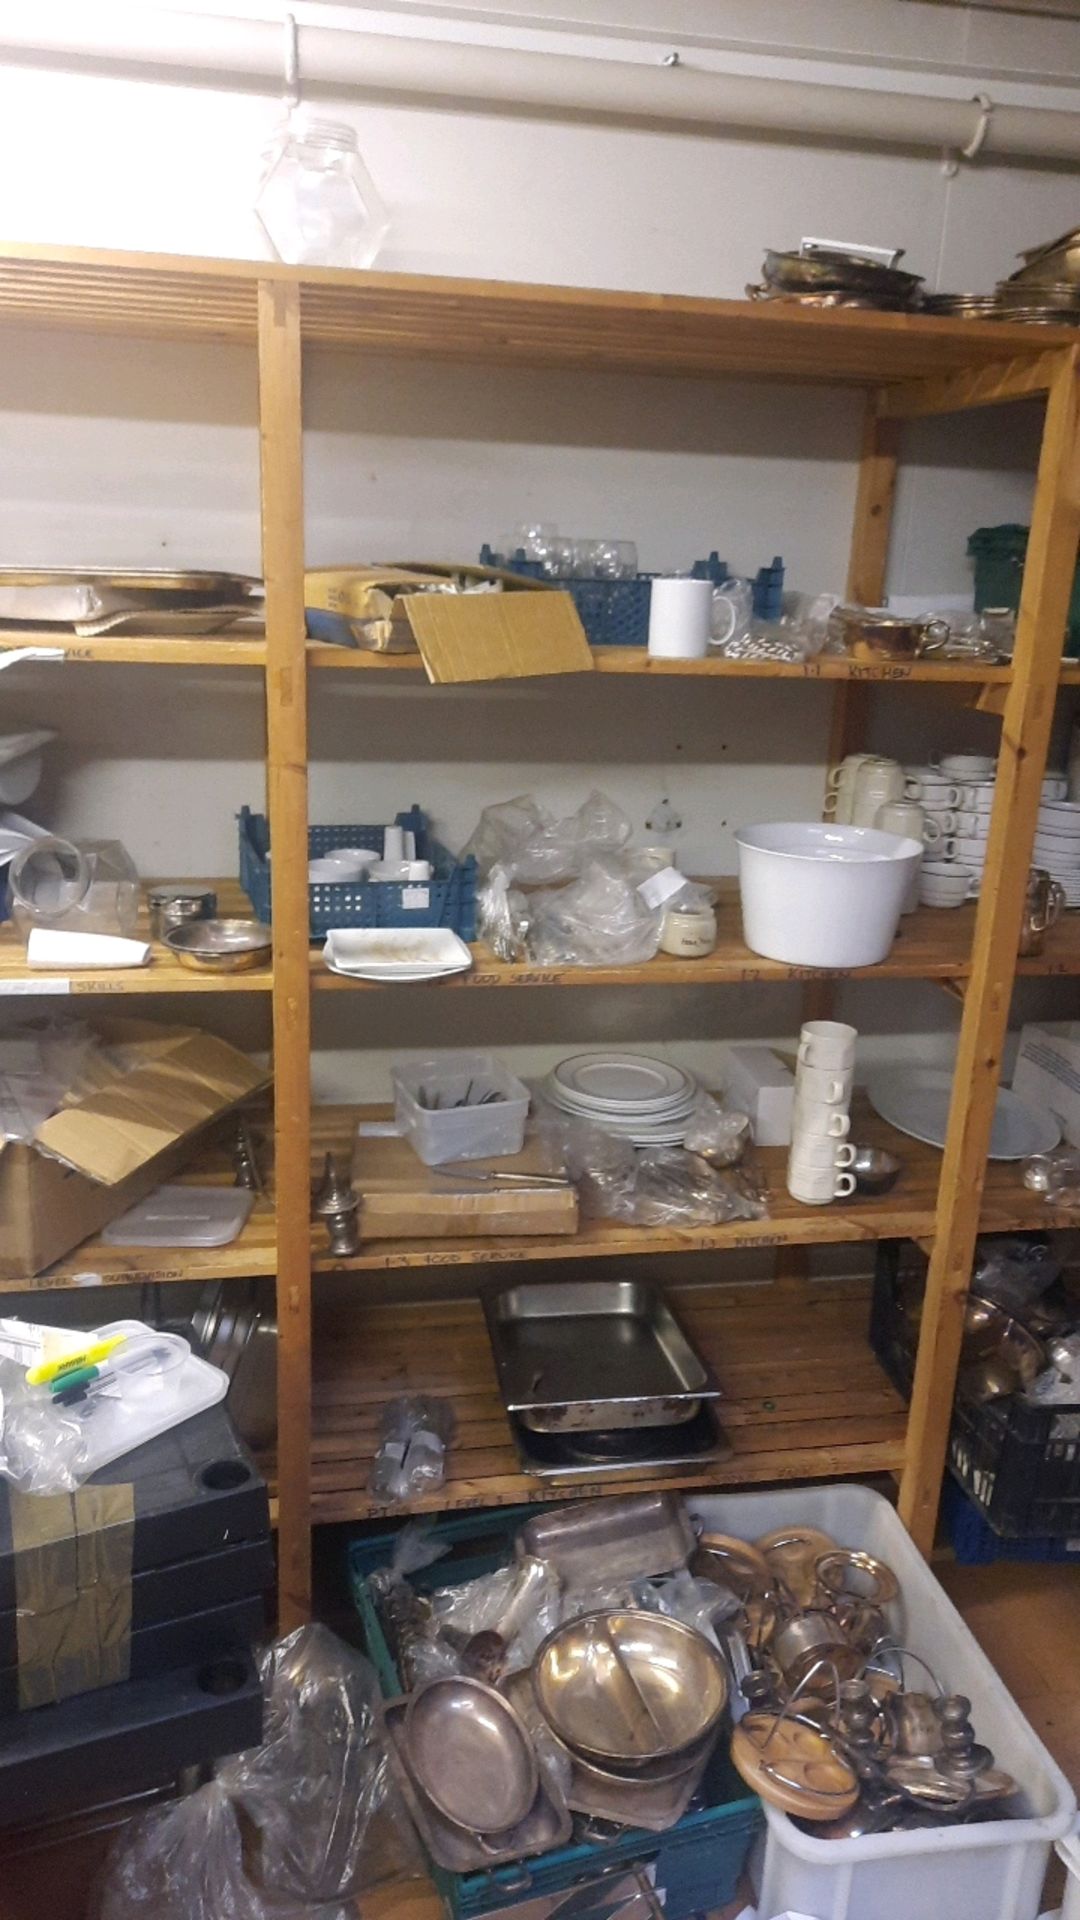 Contents Of Kitchen Storage Area Including Racking - Image 8 of 9